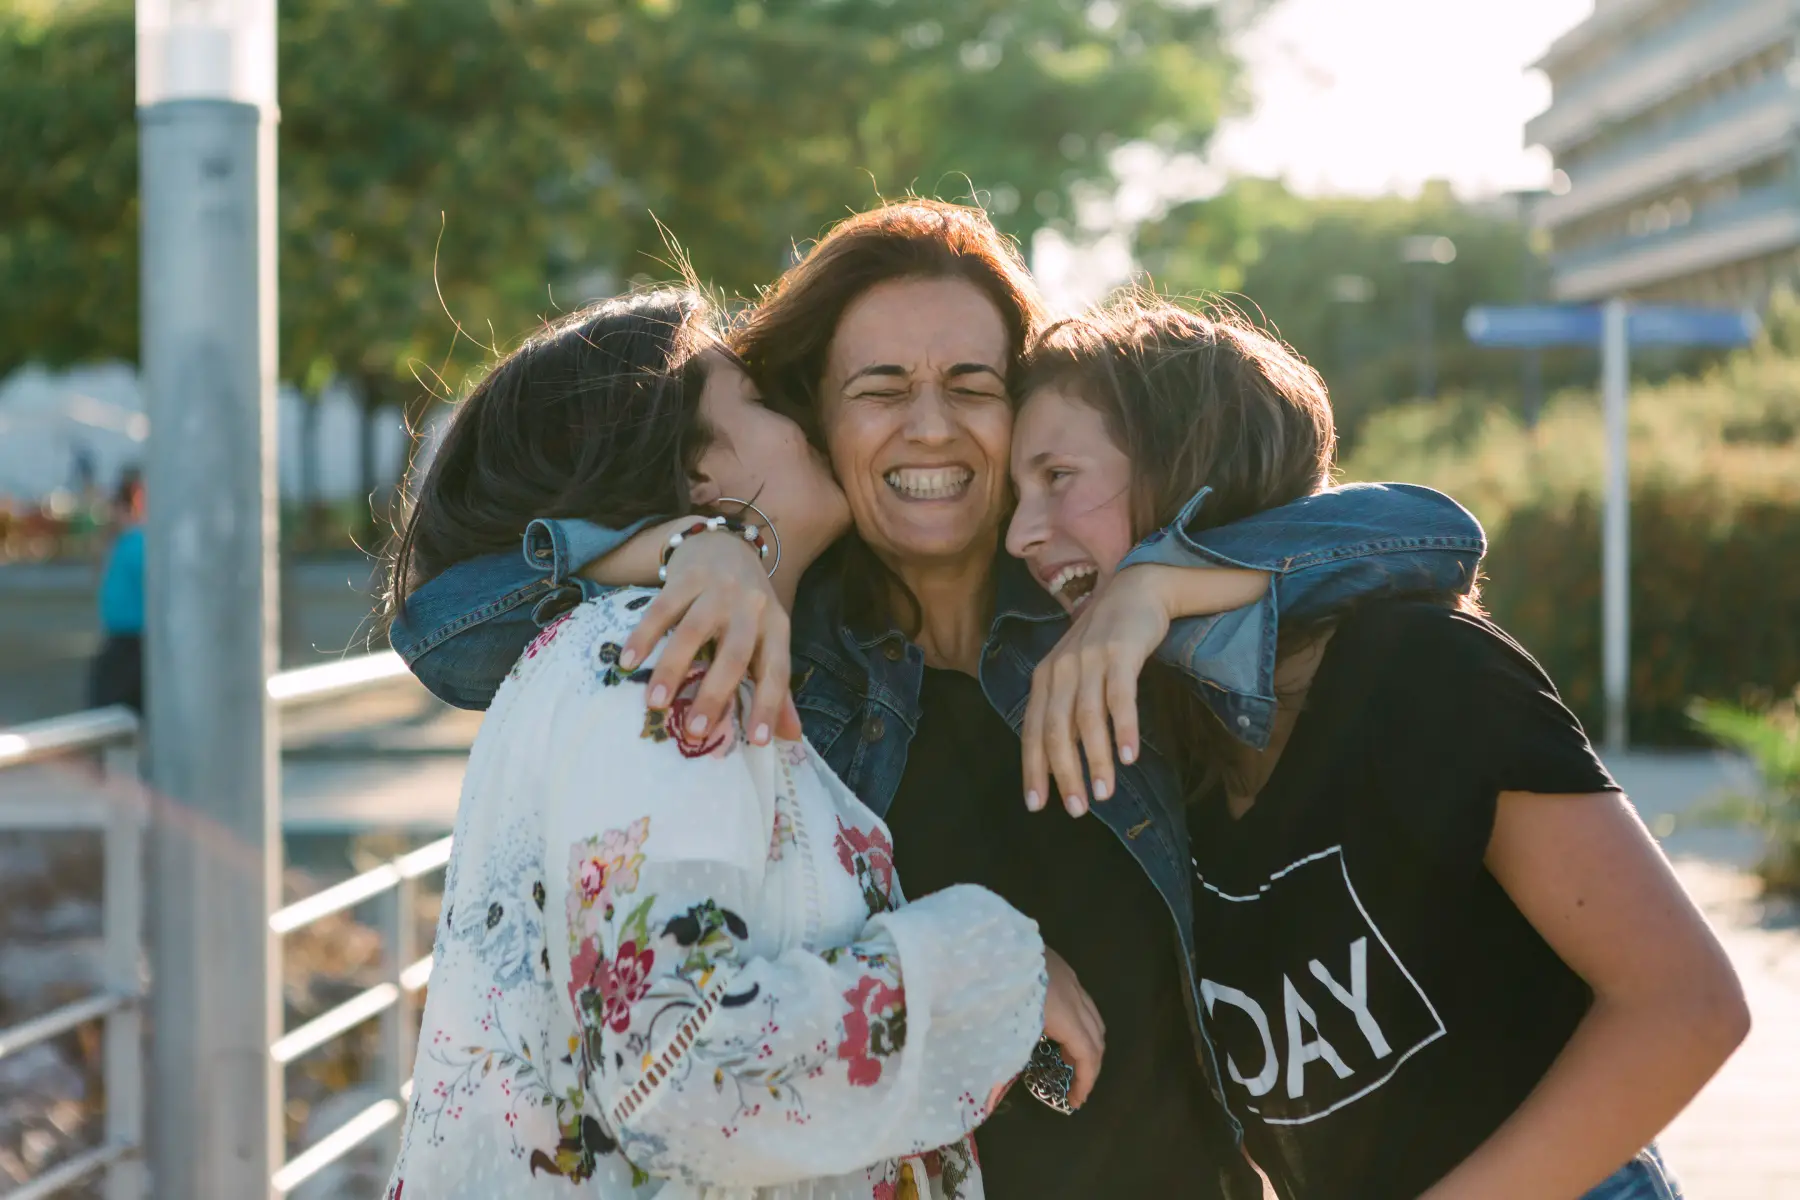 Mothers hugging two daughters excitedly